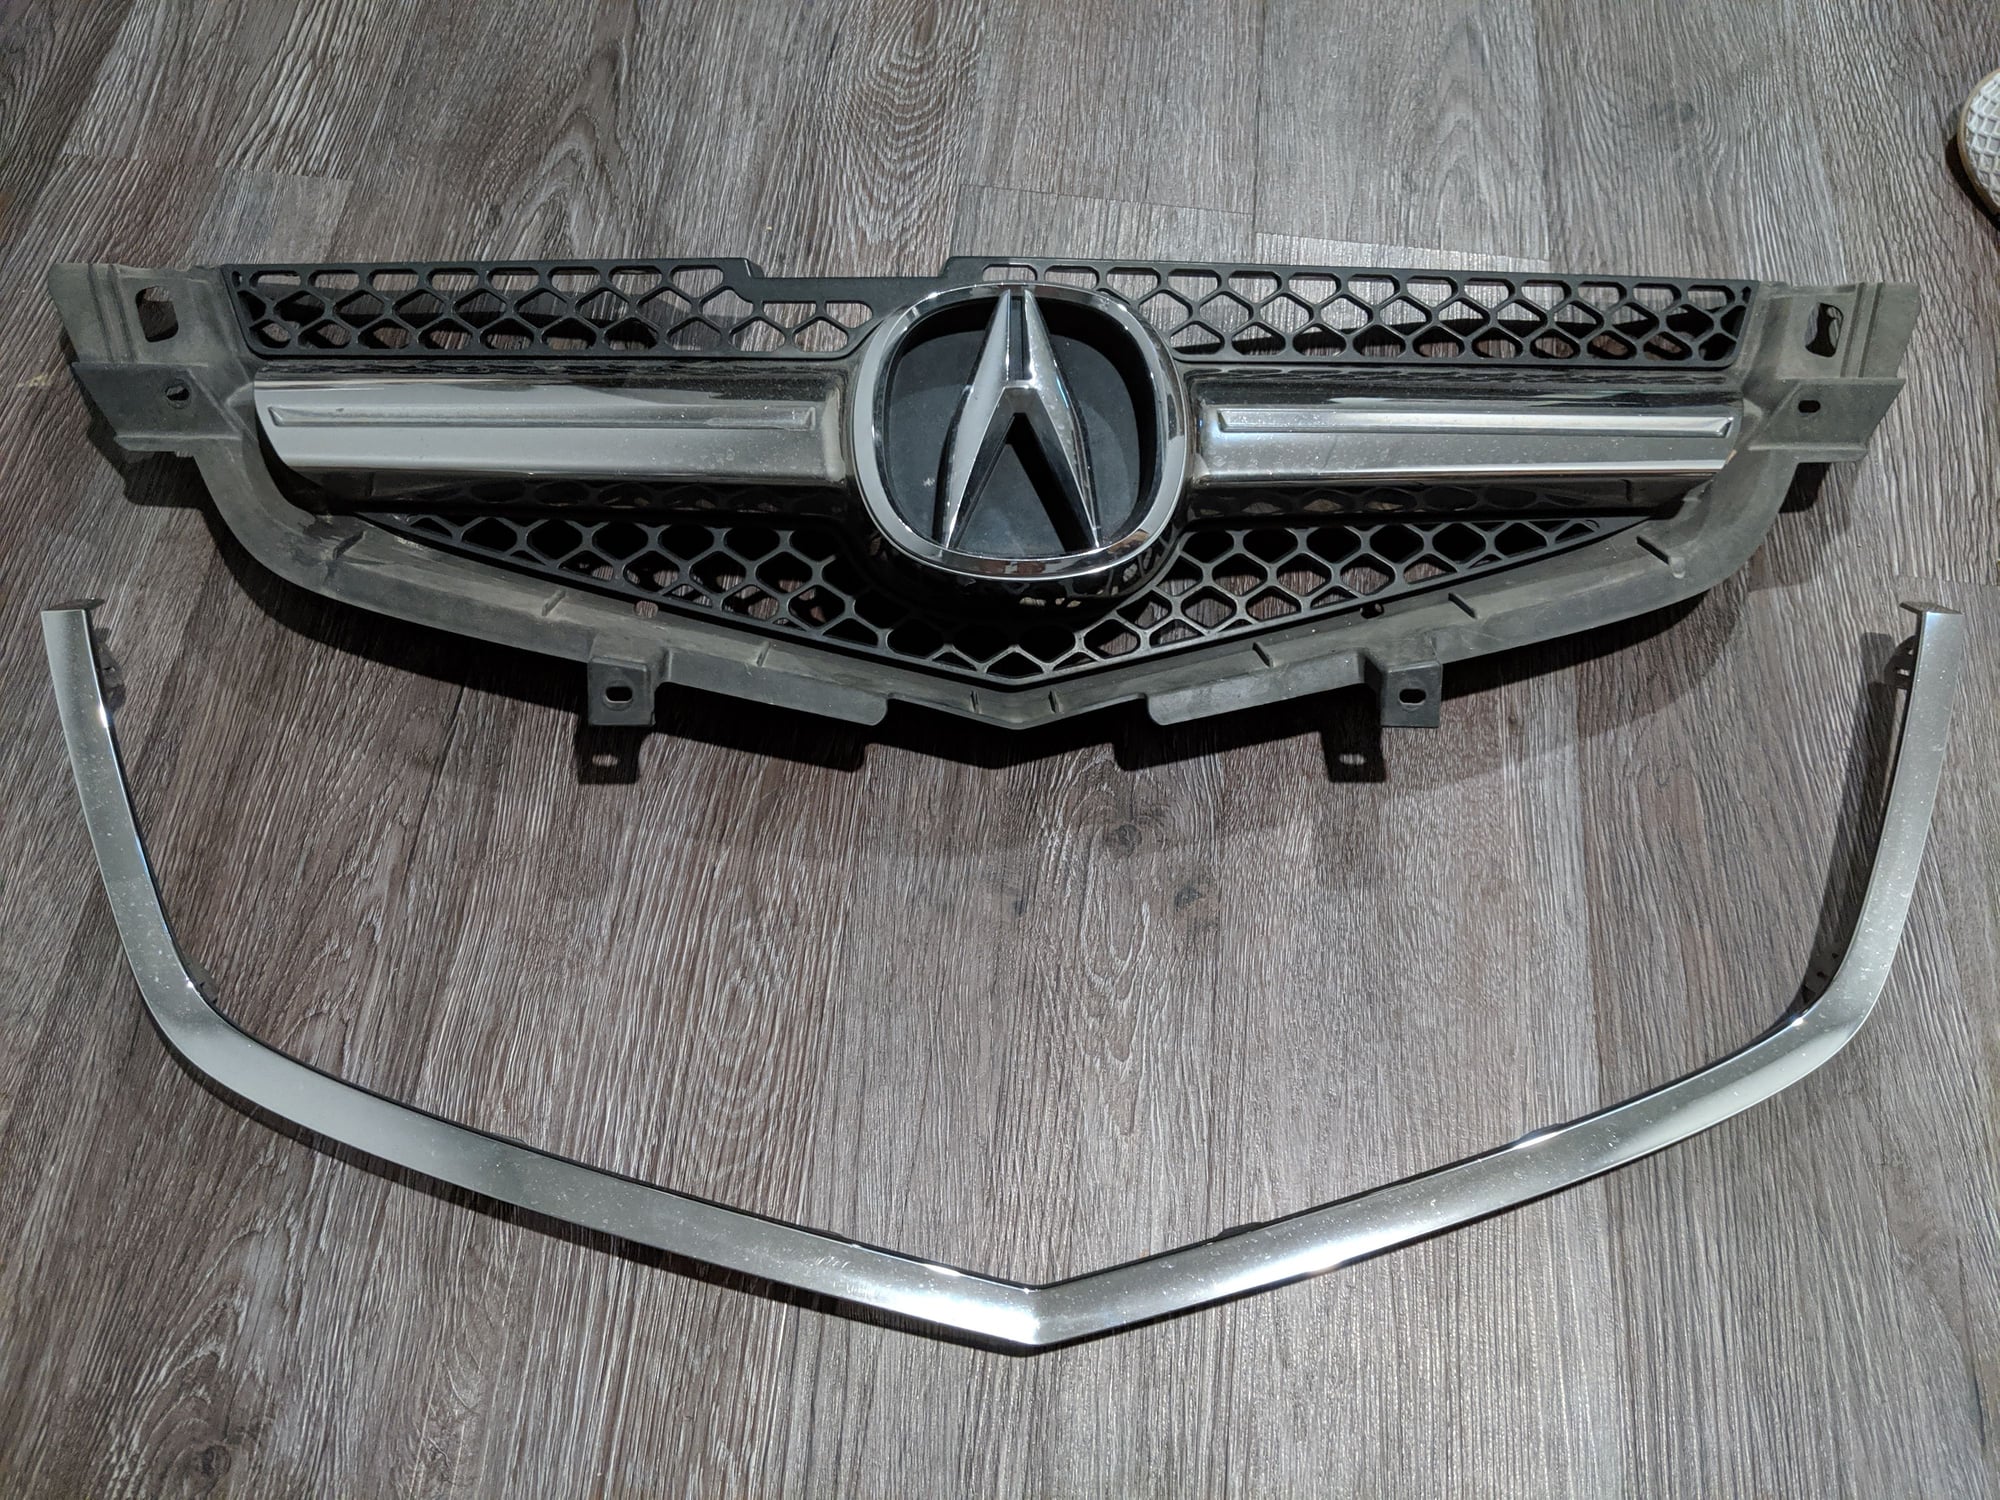 Exterior Body Parts - SOLD: TL Type S honey comb mesh grille & v trim - Used - 2007 to 2008 Acura TL - St Louis, MO 63126, United States